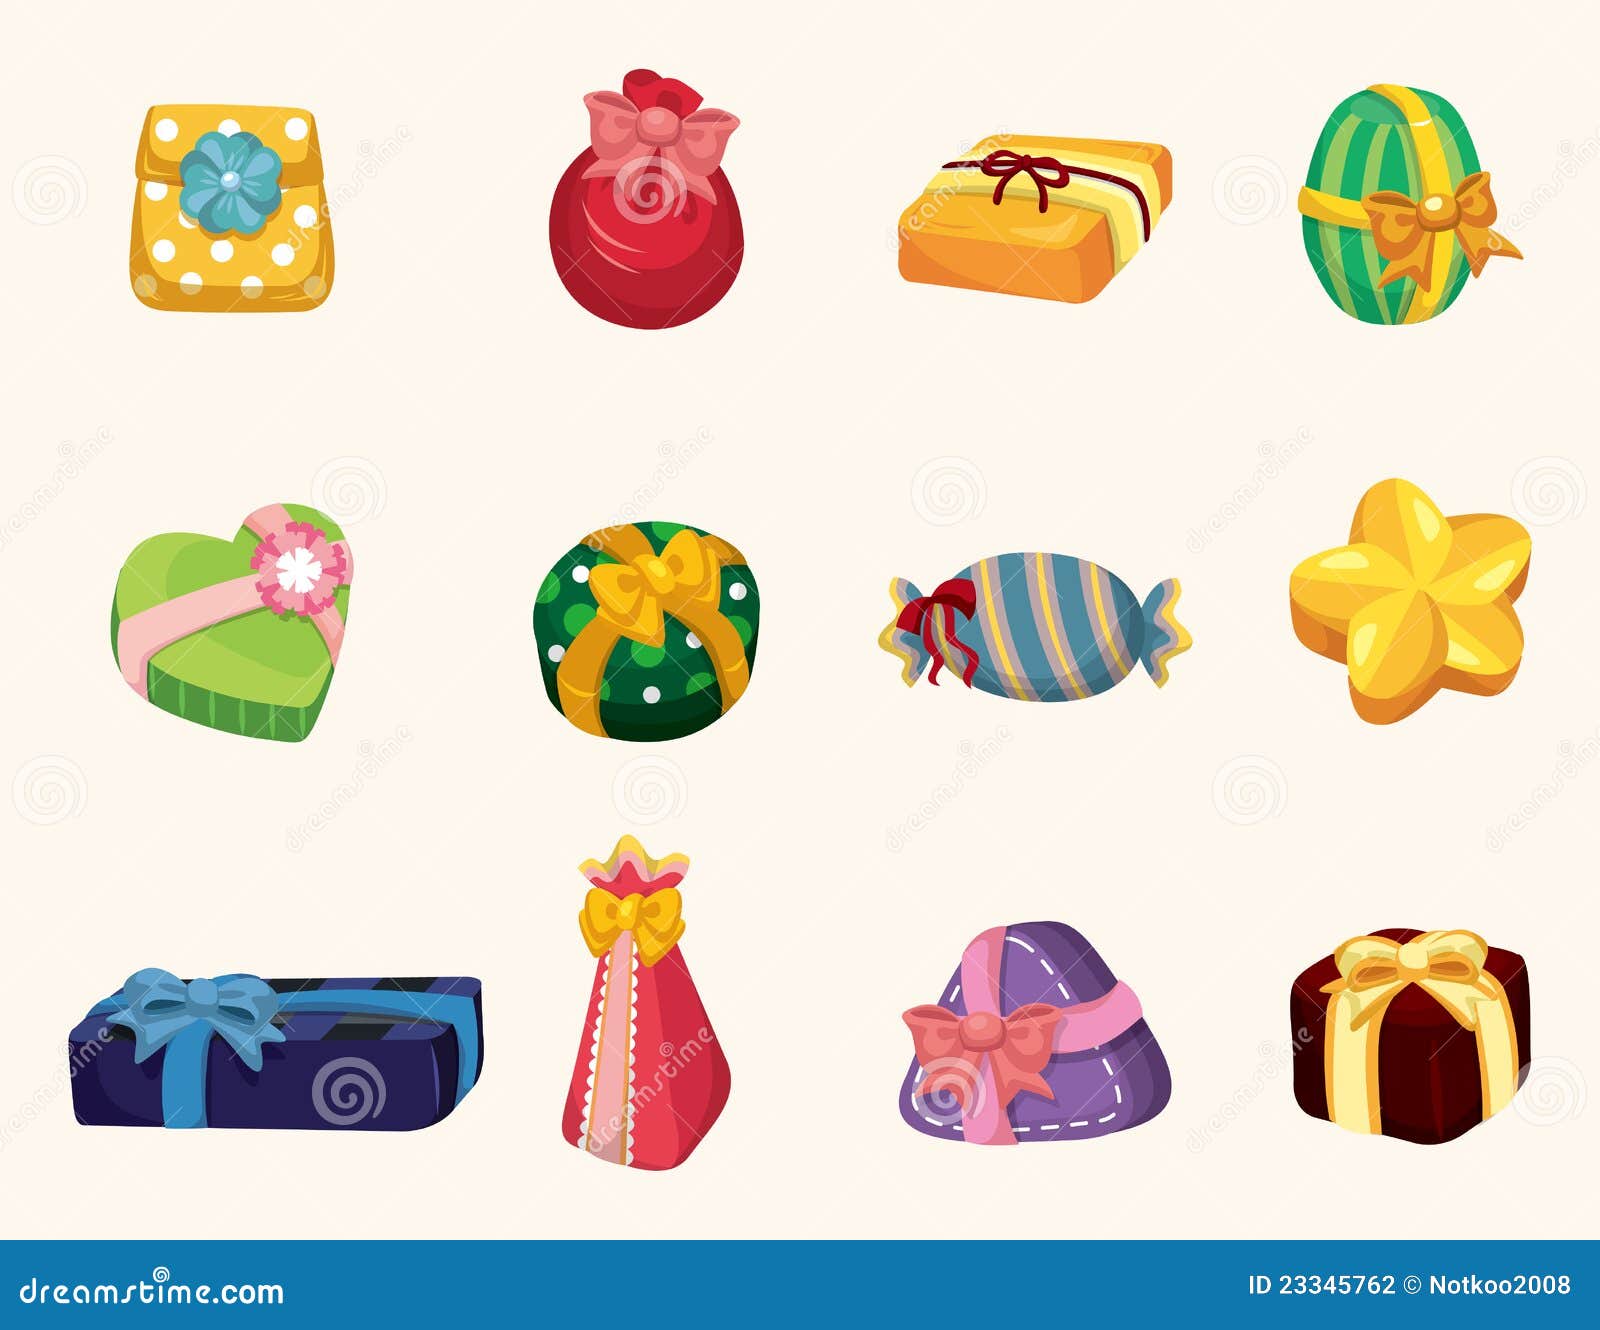 Cartoon Gifts Icon Stock Photography - Image: 23345762